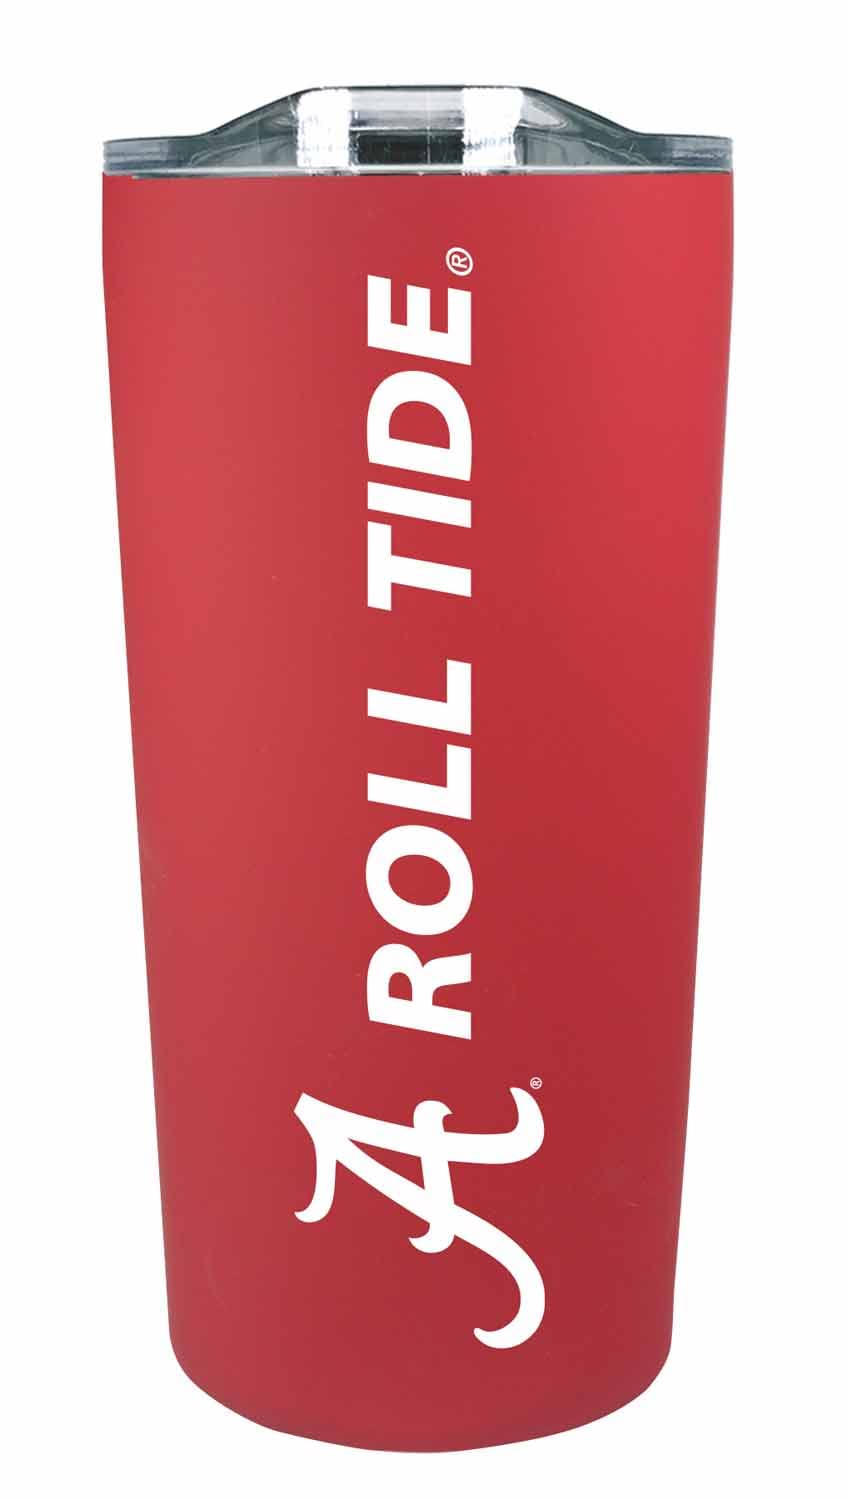 Campus Colors NCAA Stainless Steel Tumbler Perfect for Gameday - 18 oz - Double Walled - Keeps Drinks Perfectly Insulated (Alabama Crimson Tide - Red)